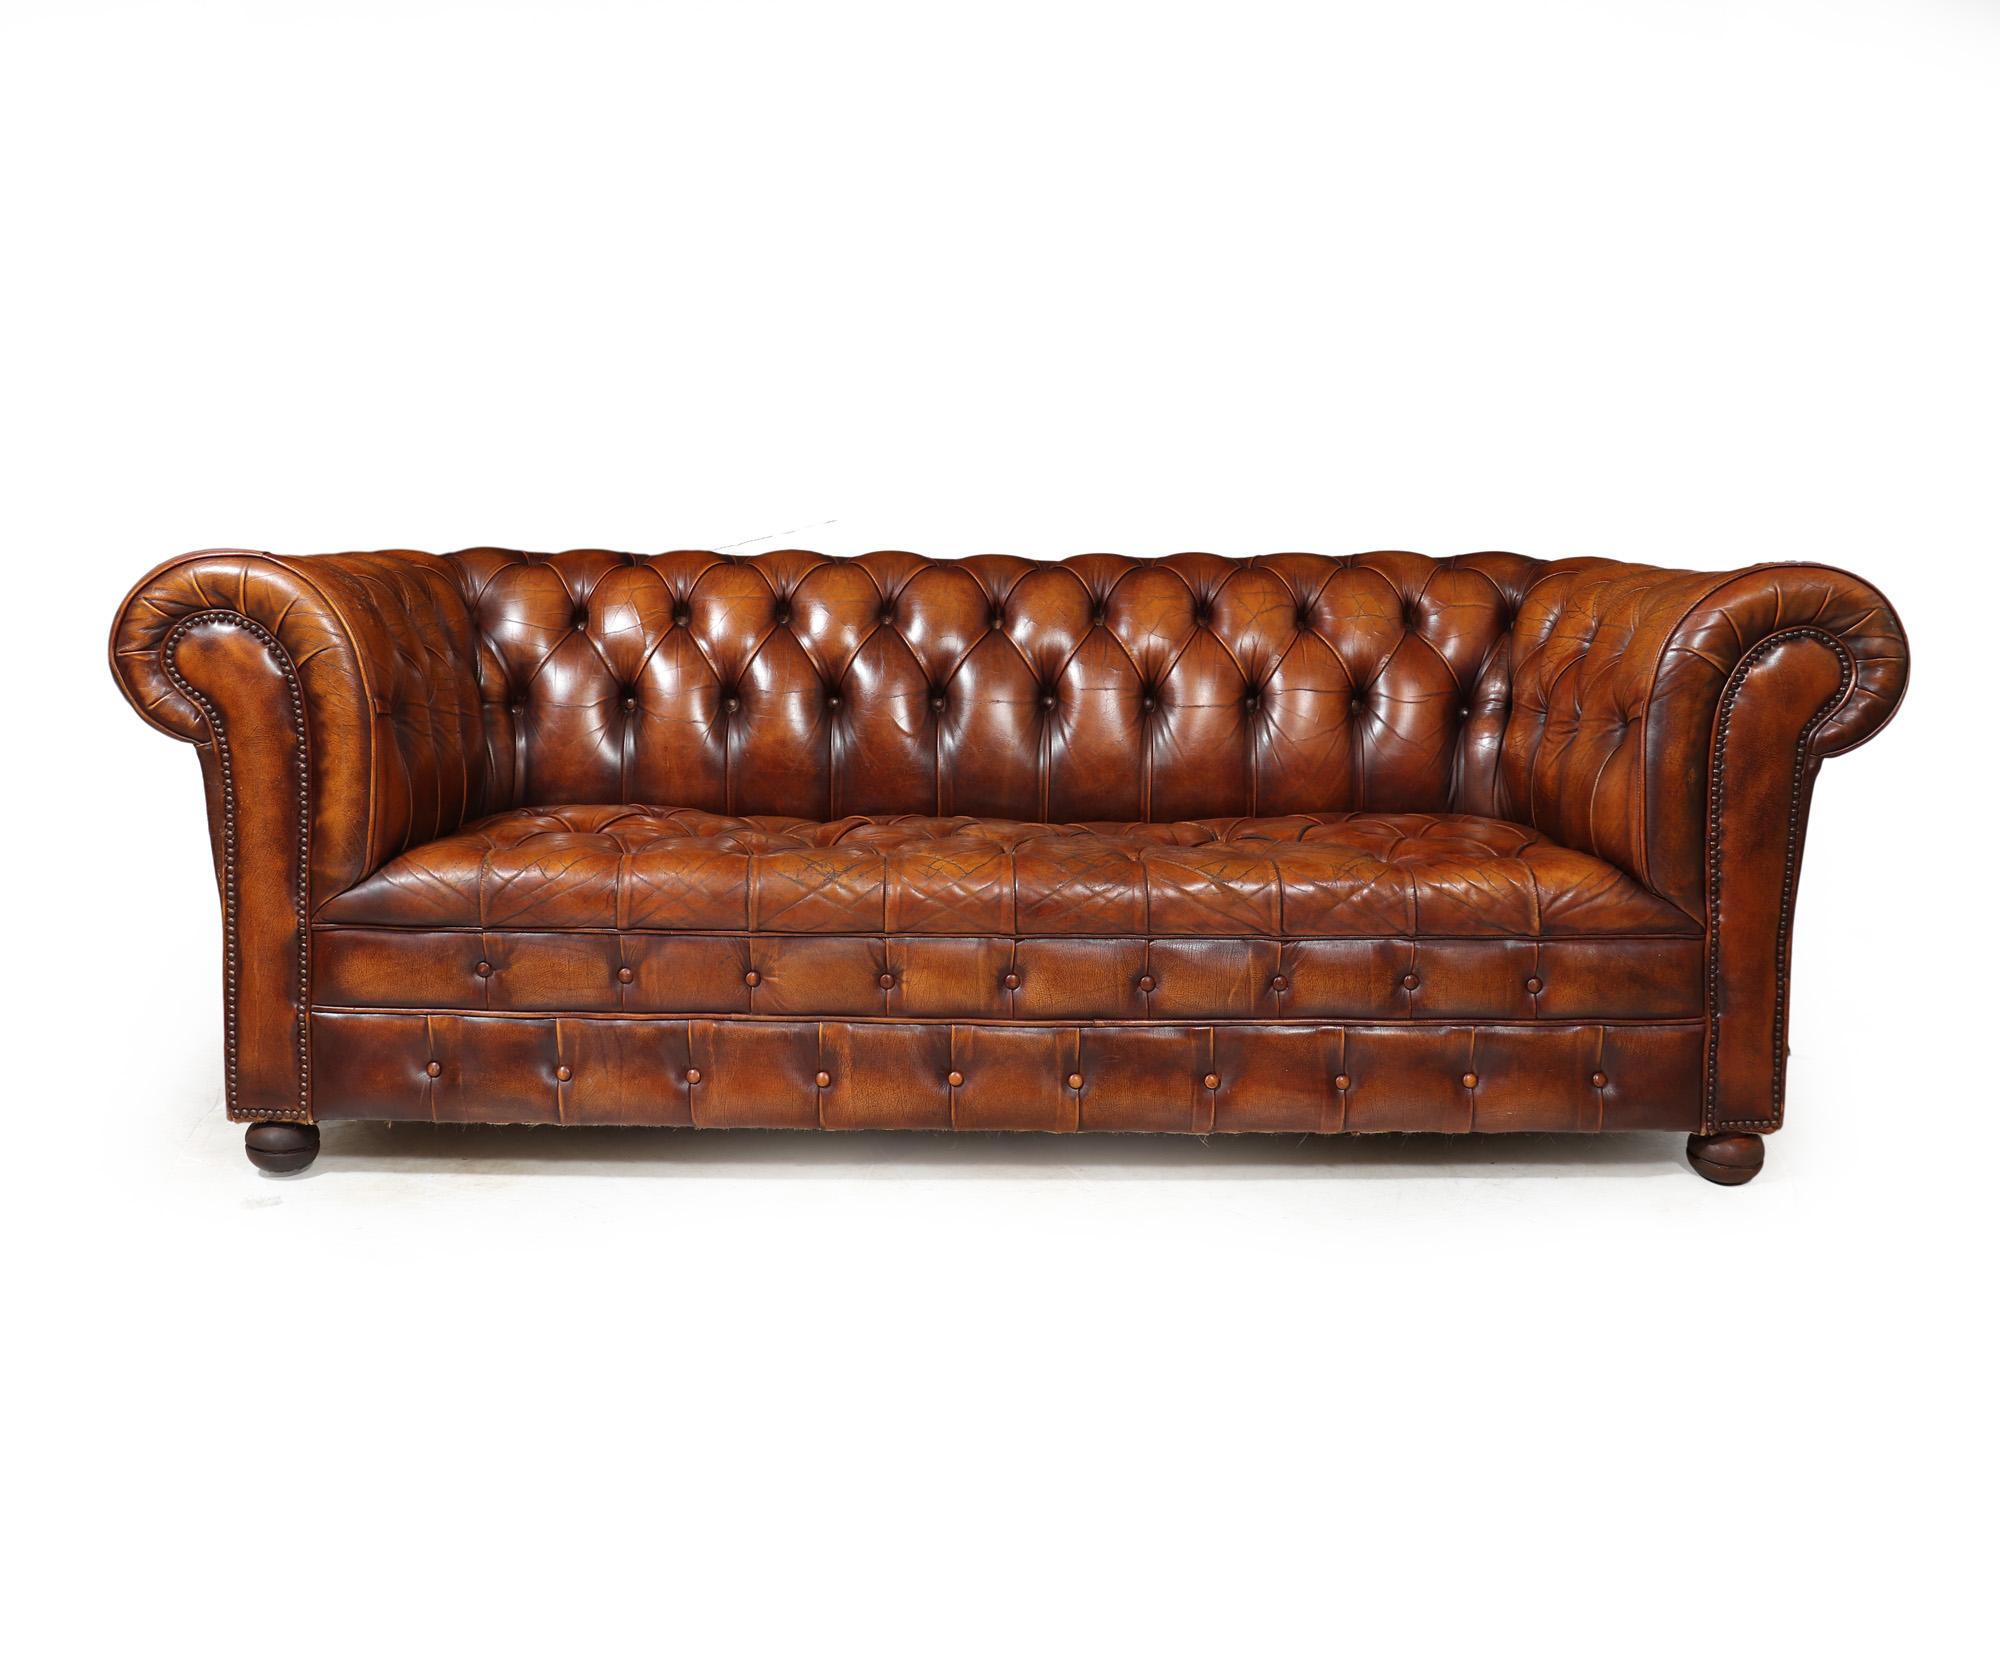 VINTAGE CHESTERFIELD SOFA
A timeless piece of furniture - an authentic and elegant English vintage leather button seated hand dyed Chesterfield sofa, meticulously crafted back in the 1960s. The rich tan brown leather exudes classic charm,